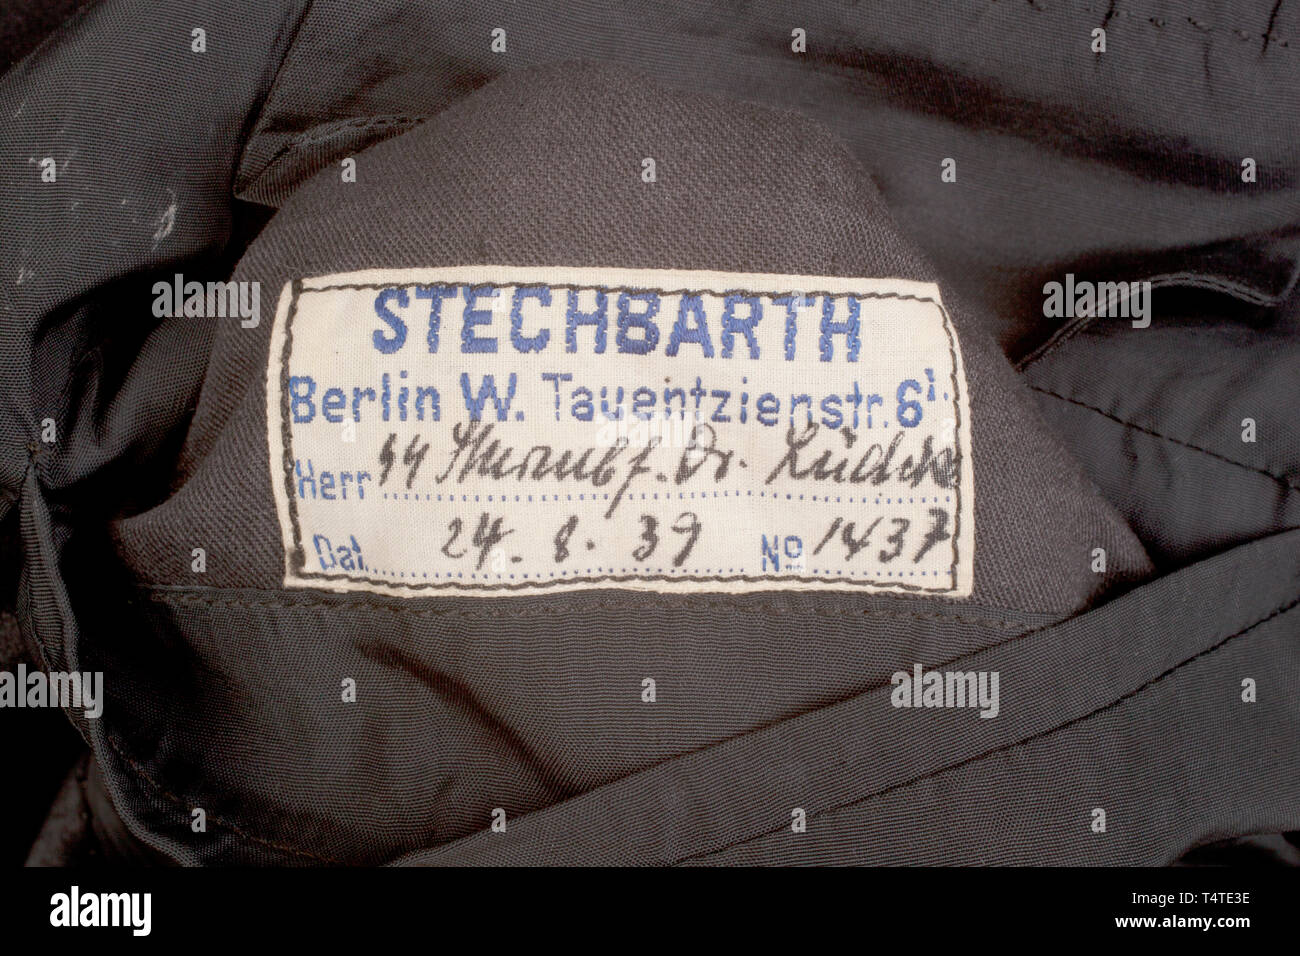 THE JOHN PEPERA COLLECTION, An Evening Dress Jacket of SS-Sturmbannführer Dr. Lüdcke, Tailor-made black wool doeskin double-breasted waist jacket with open collar and black silk lapels, silver/aluminium cord trim on the collar and cuffs, silver/aluminium buttons with runes and wreath in raised relief. Black wool collar tabs edged in silver/aluminium cord, plain on the right side, four rank pips on the left. Silver/aluminium interwoven cord shoulder boards on black wool background, red wool and silk grosgrain armband bordered in silver/aluminium cord, an Old Fighter's chevro, Editorial-Use-Only Stock Photo